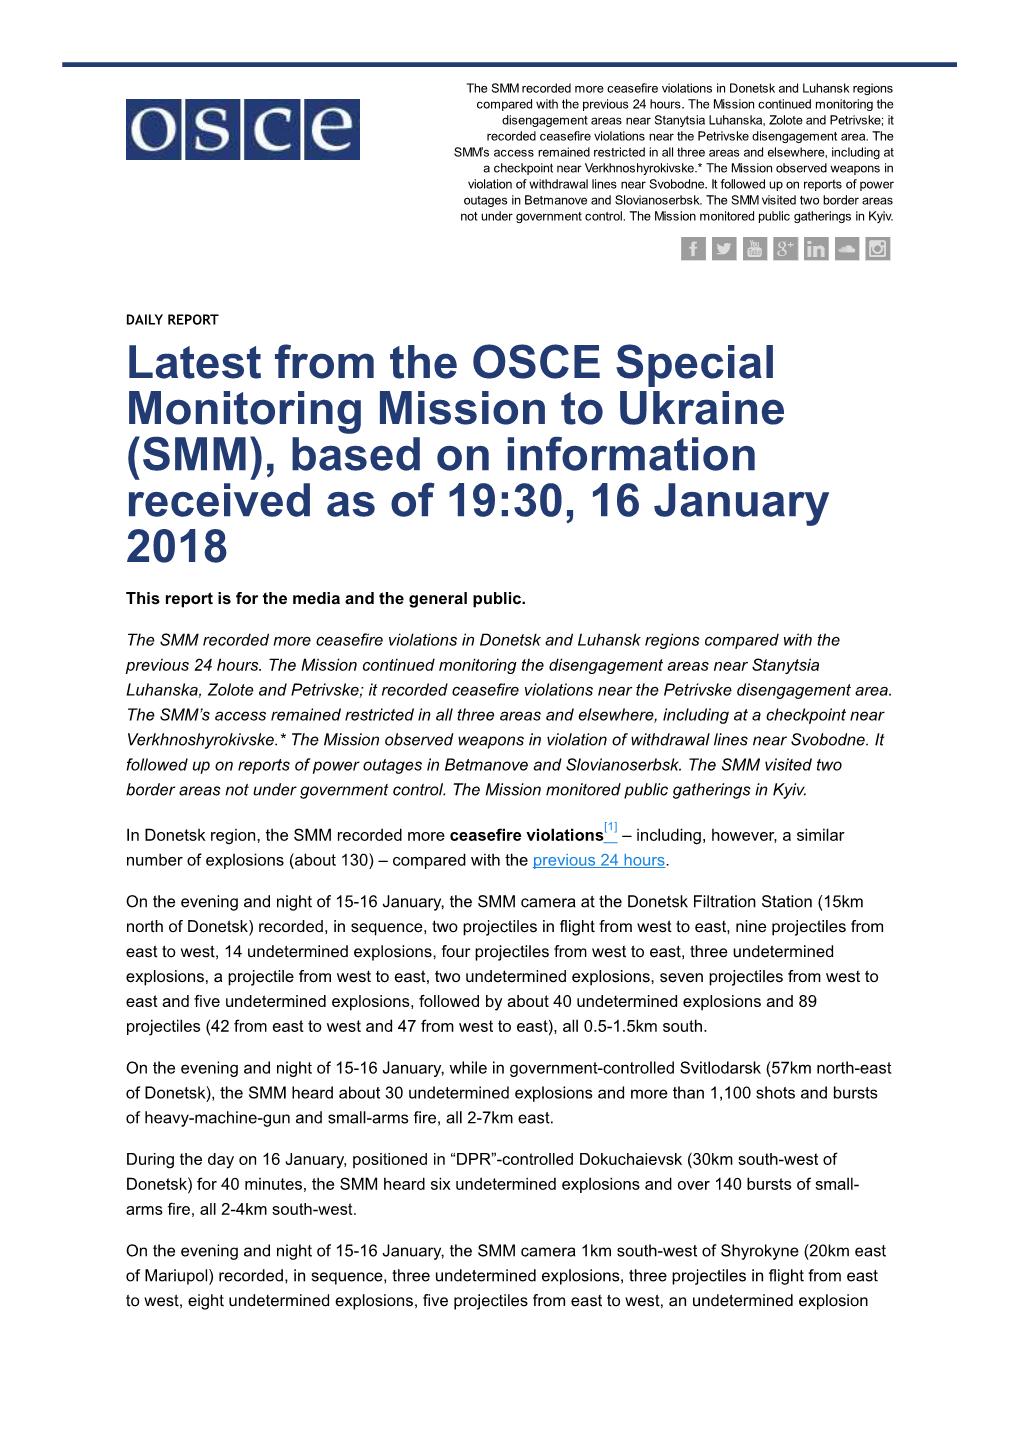 Latest from the OSCE Special Monitoring Mission to Ukraine (SMM), Based on Information Received As of 19:30, 16 January 2018